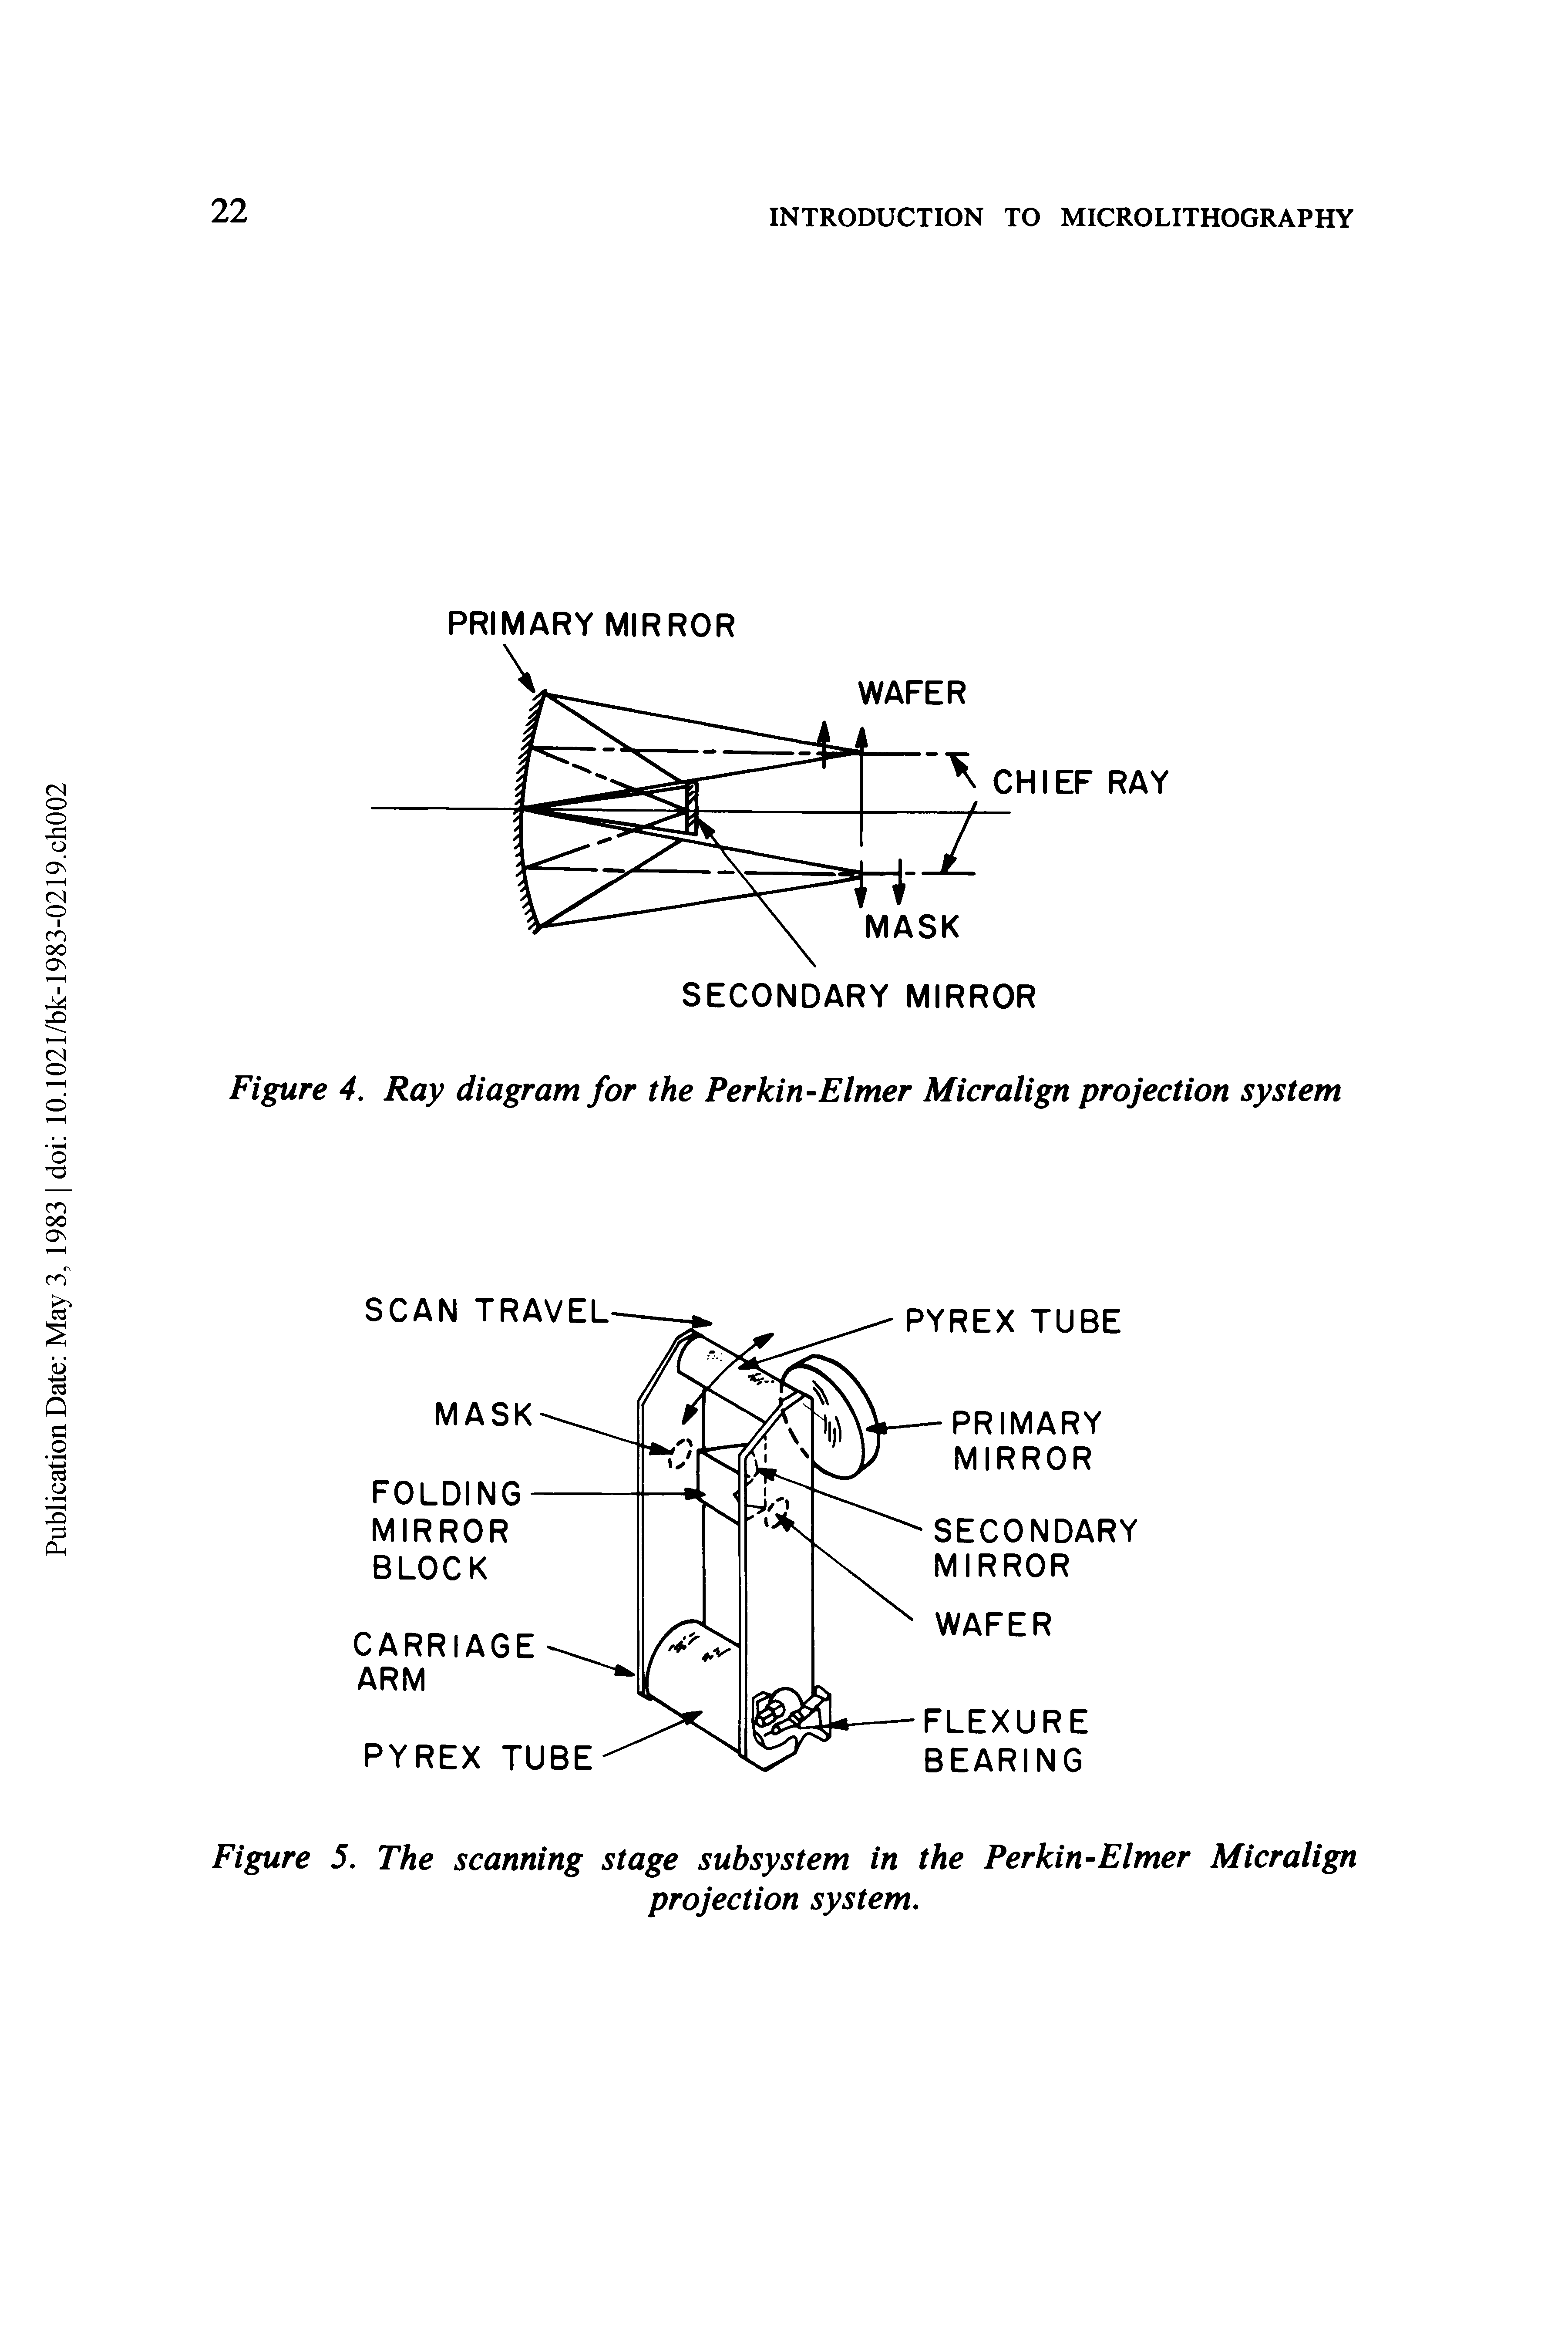 Figure 4. Ray diagram for the Perkin-Elmer Micralign projection system...